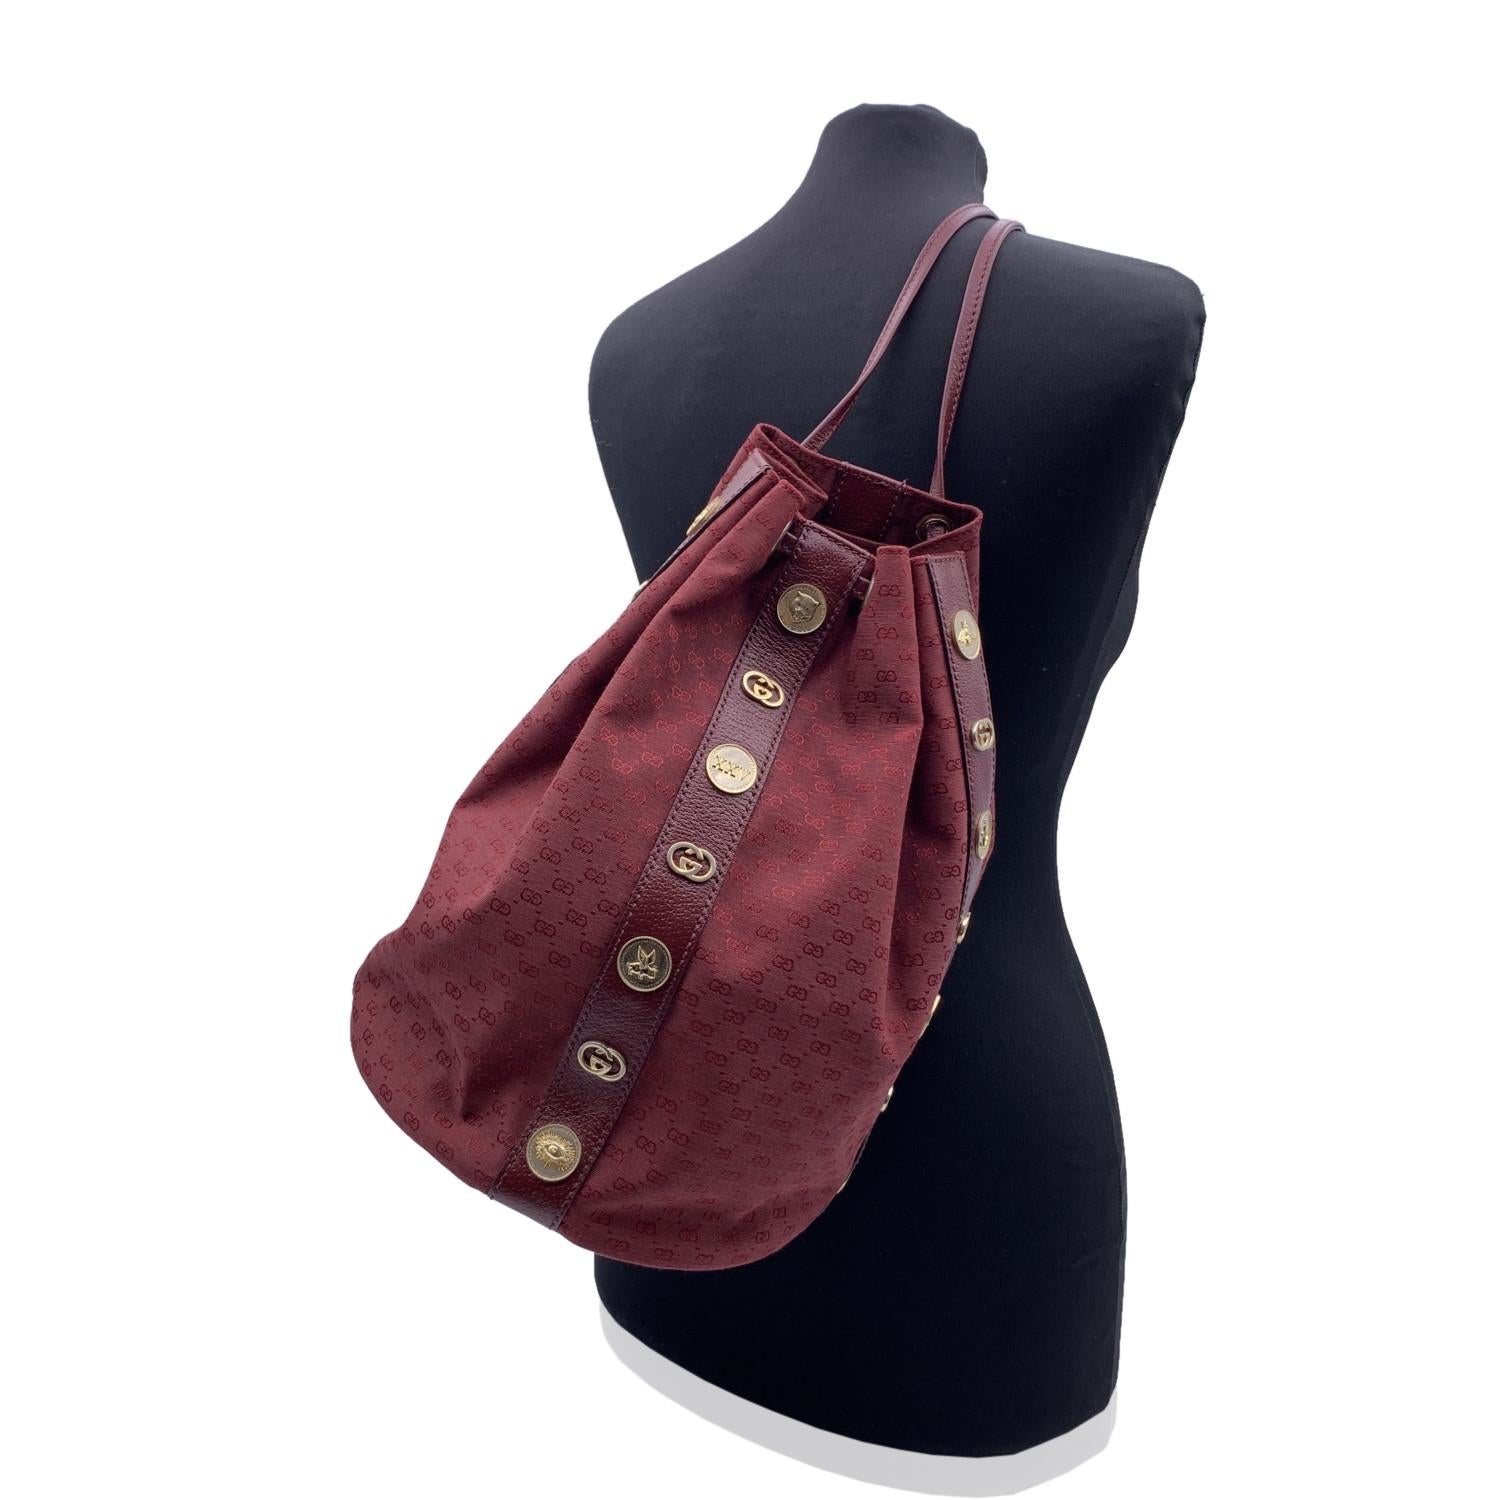 Gucci drawstring bucket backpack in burgundy monogram canvas. The bag is shaped like a bucket bag and embellished with gold metal medallions inspired by a vintage coin that recreates the brand's iconic elements: interlocking G's, feline heads,